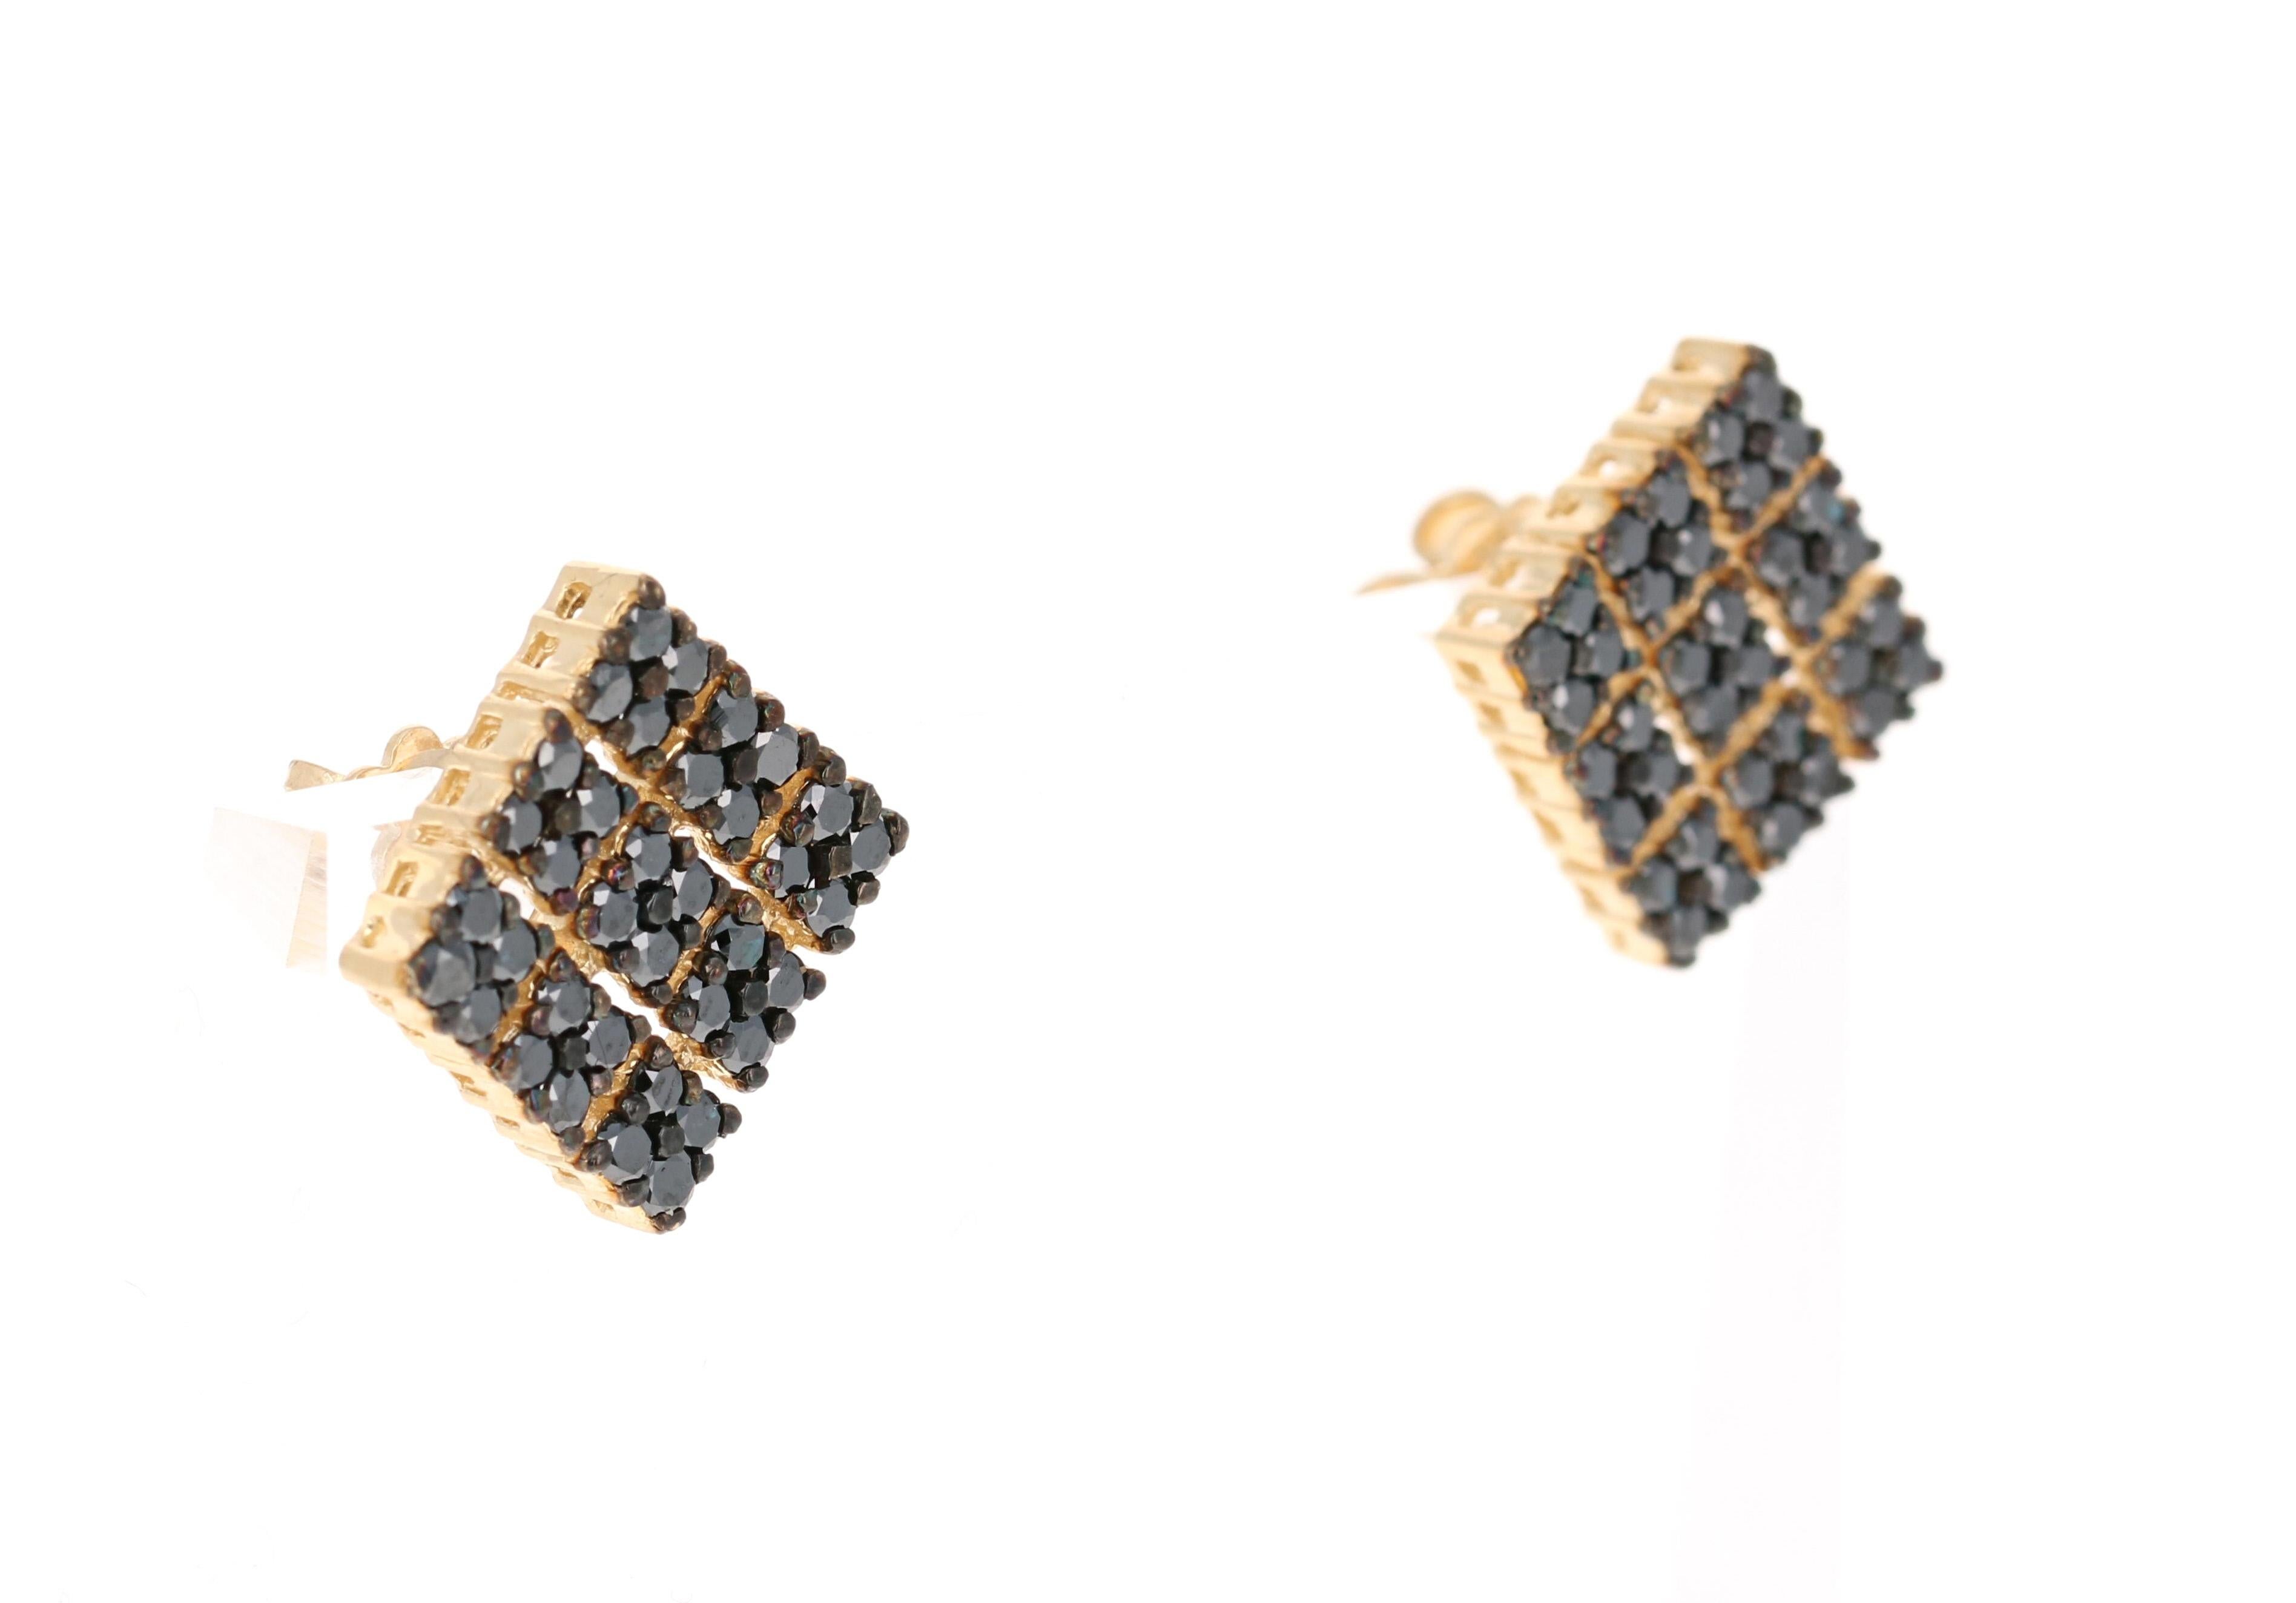 Black Beauties! Great for a cocktail party, work event, or even a casual day out! 

These stunning earrings have 72 Black Round Cut Diamonds that weigh 2.38 Carats. 

Curated in 14 Karat Yellow Gold and weigh approximately 7.4 grams. 

